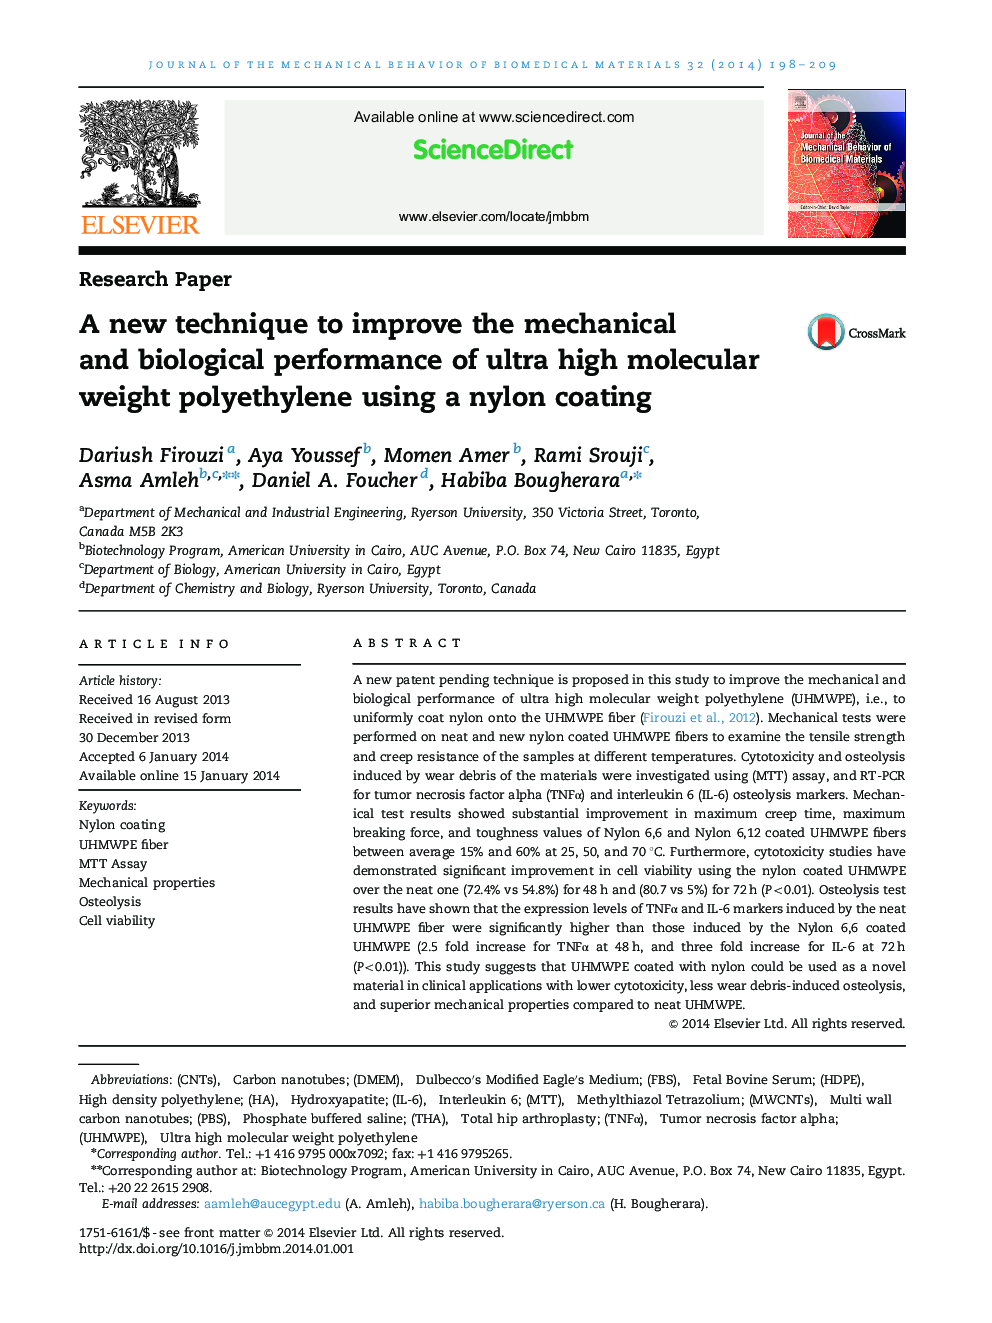 A new technique to improve the mechanical and biological performance of ultra high molecular weight polyethylene using a nylon coating